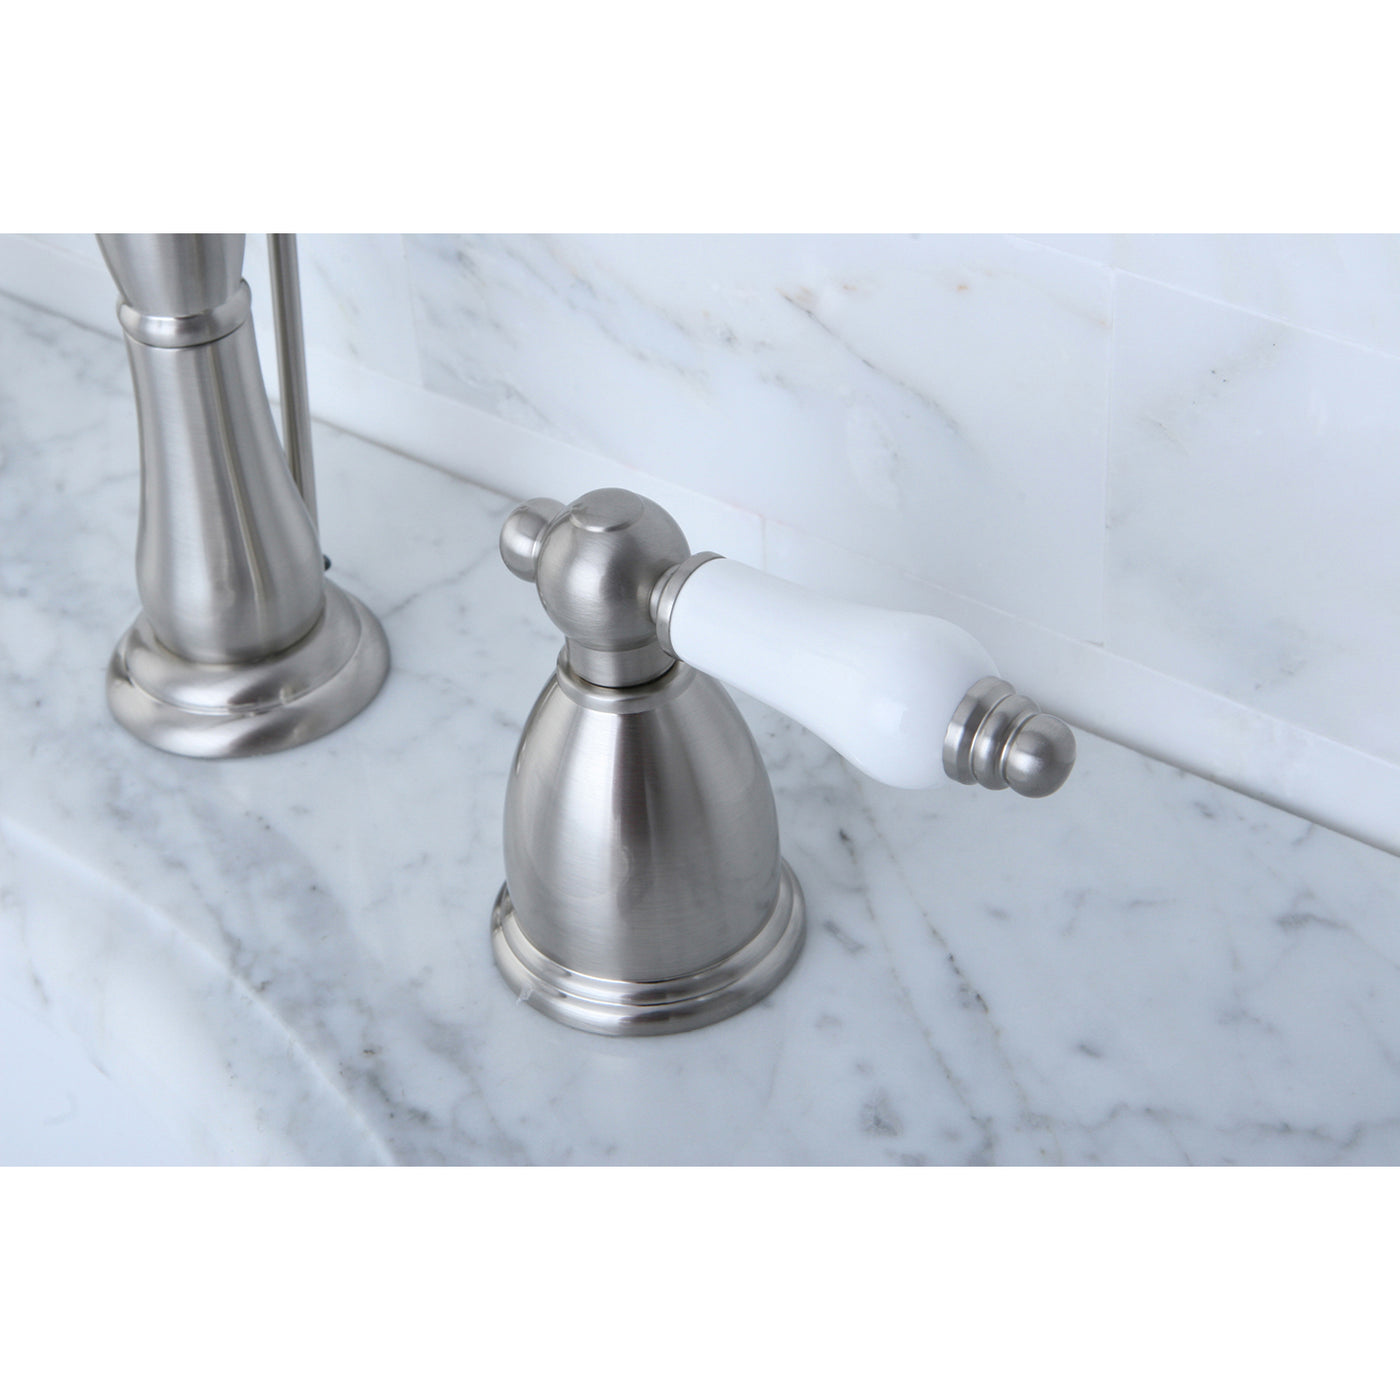 Elements of Design EB1978PL Widespread Bathroom Faucet with Plastic Pop-Up, Brushed Nickel